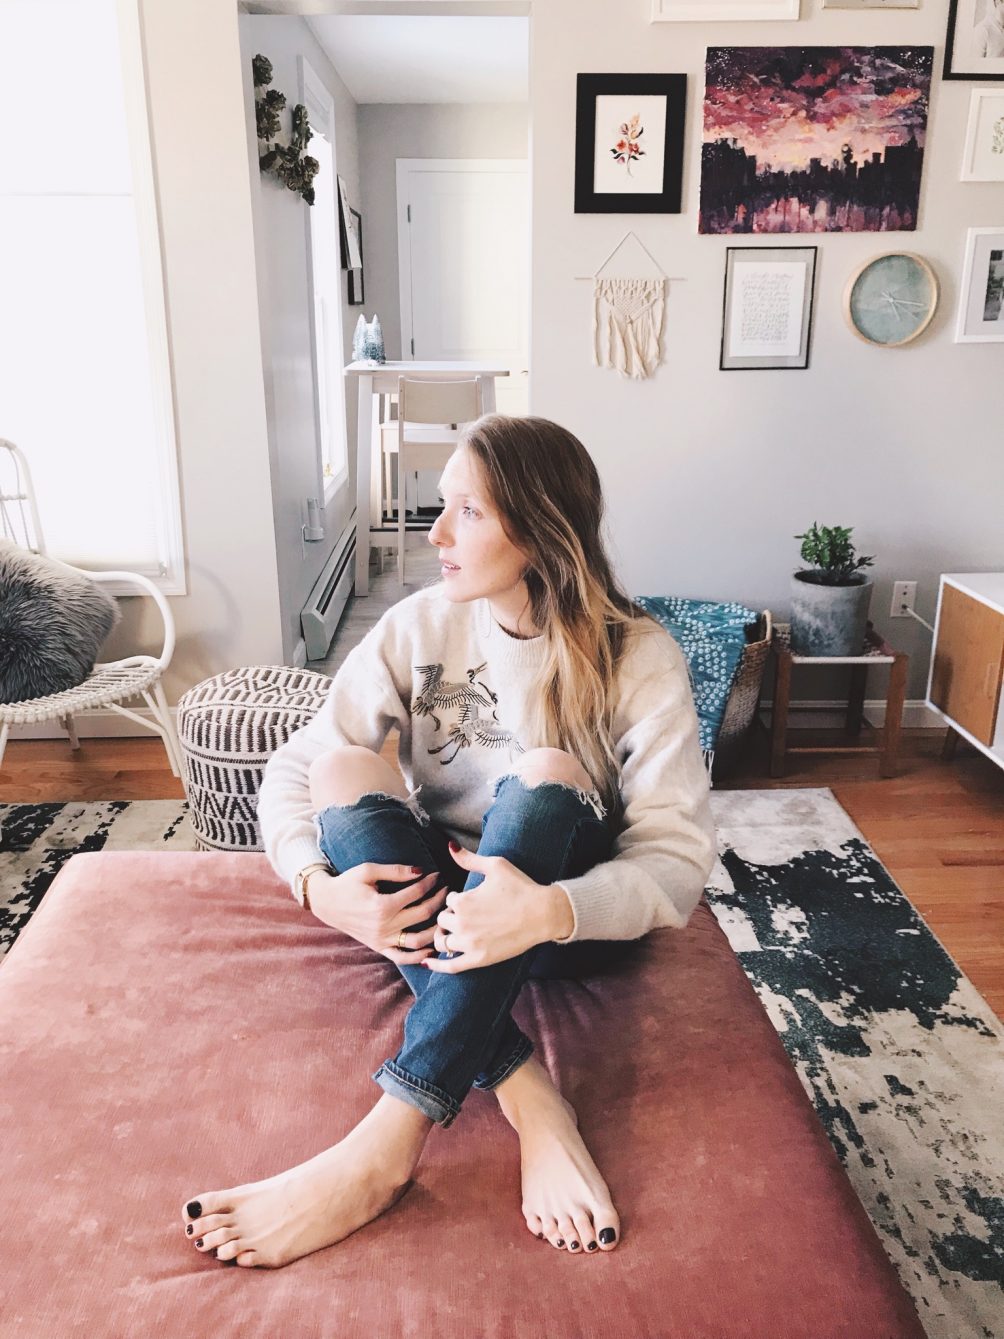 sharing four dimensions of self care for a fresh start in 2018: body, mind, spirit, relationships // one brass fox